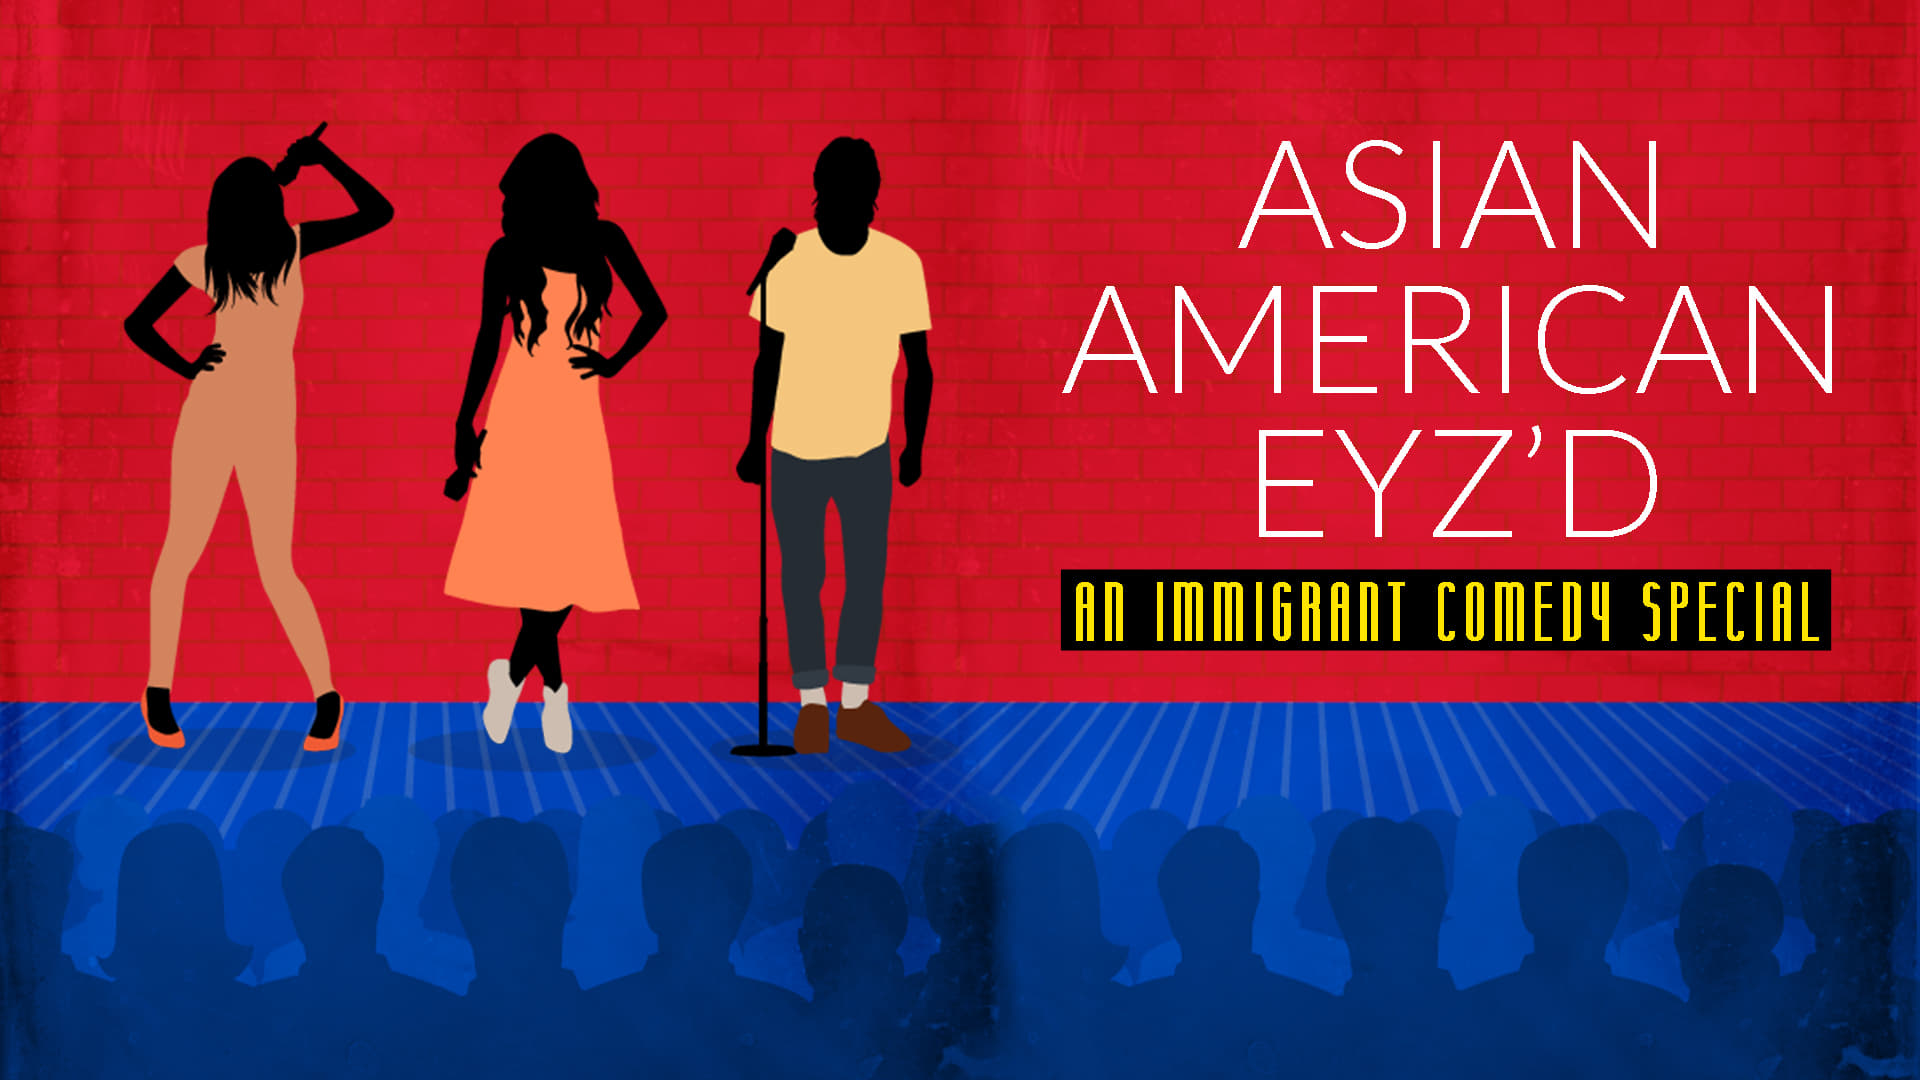 Asian American Eyz'd: An Immigrant Comedy Special